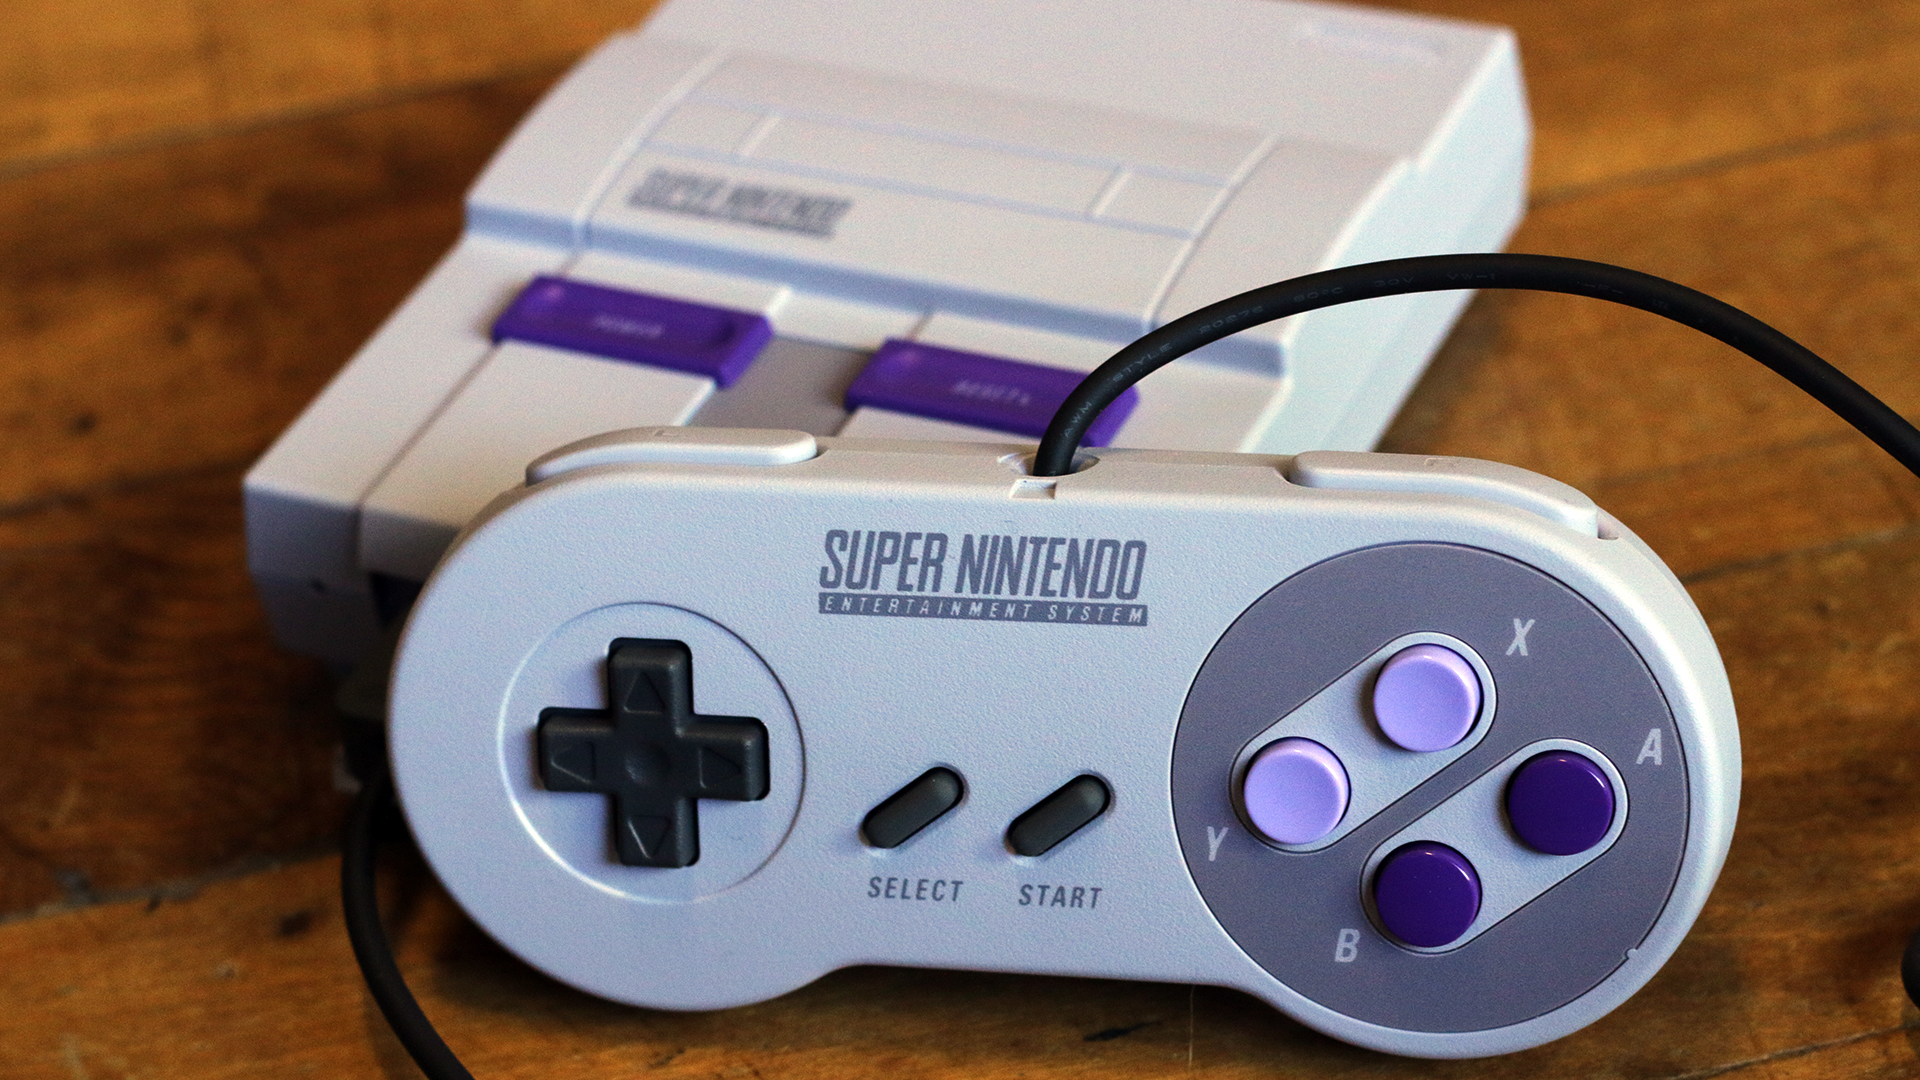 Snes Classic Edition Review Retro Throwback - Gamecube Nintendo Gamecube Nintendo Gamecube Nintendo - HD Wallpaper 